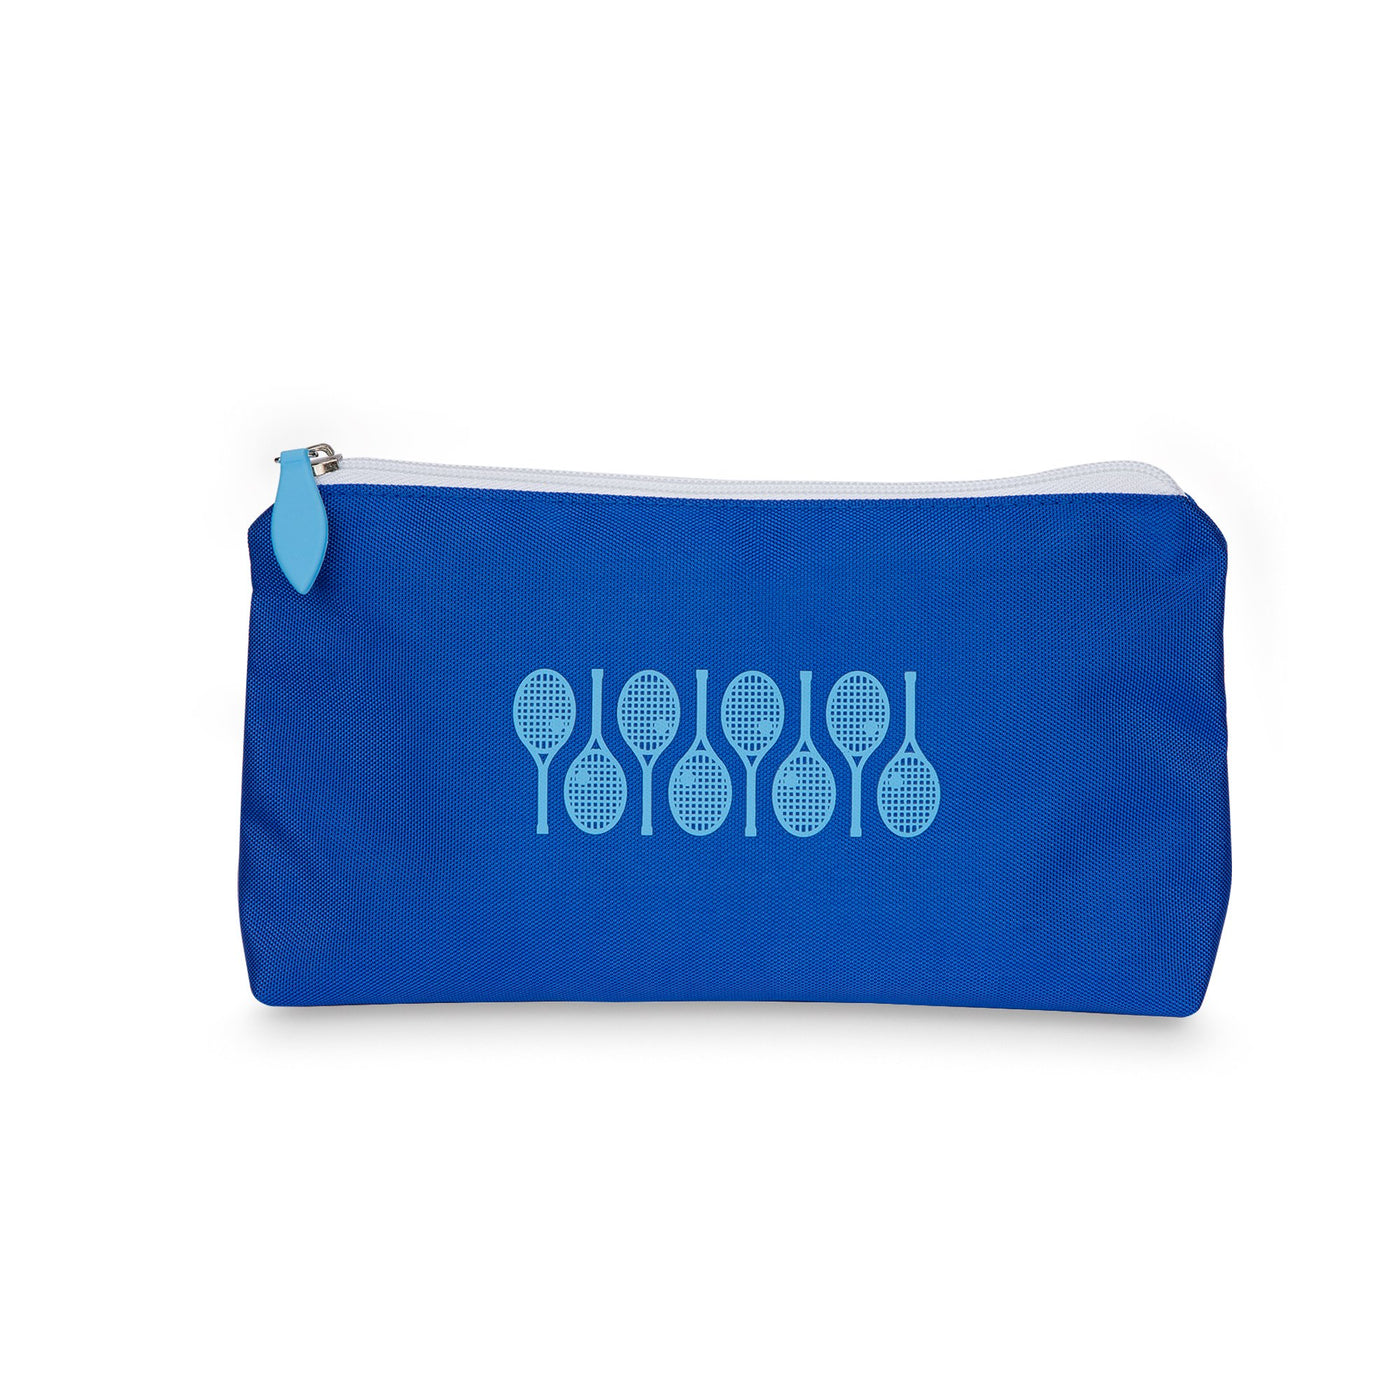 Front view of small everyday pouch with top zipper. Pouch is blue with light blue racquets printed across the front.